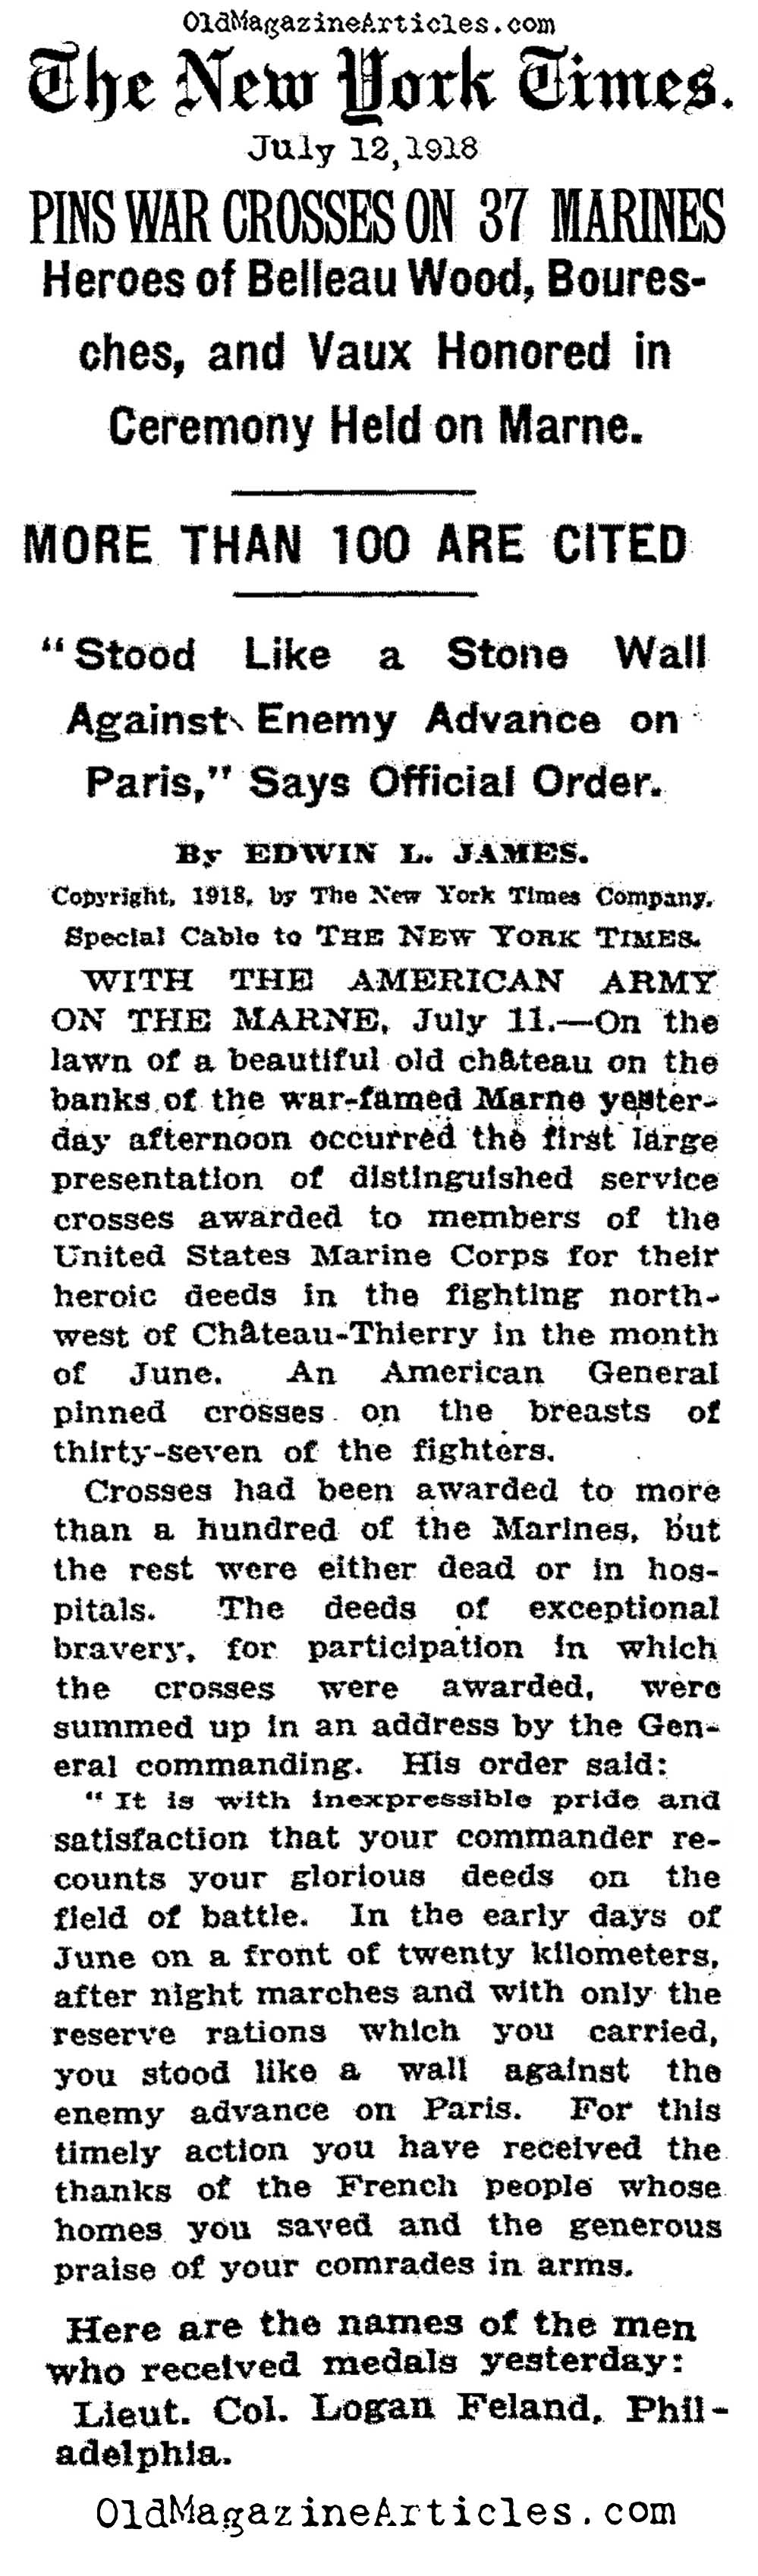 The Decorated Marines from Belleau Wood (NY Times, 1918)